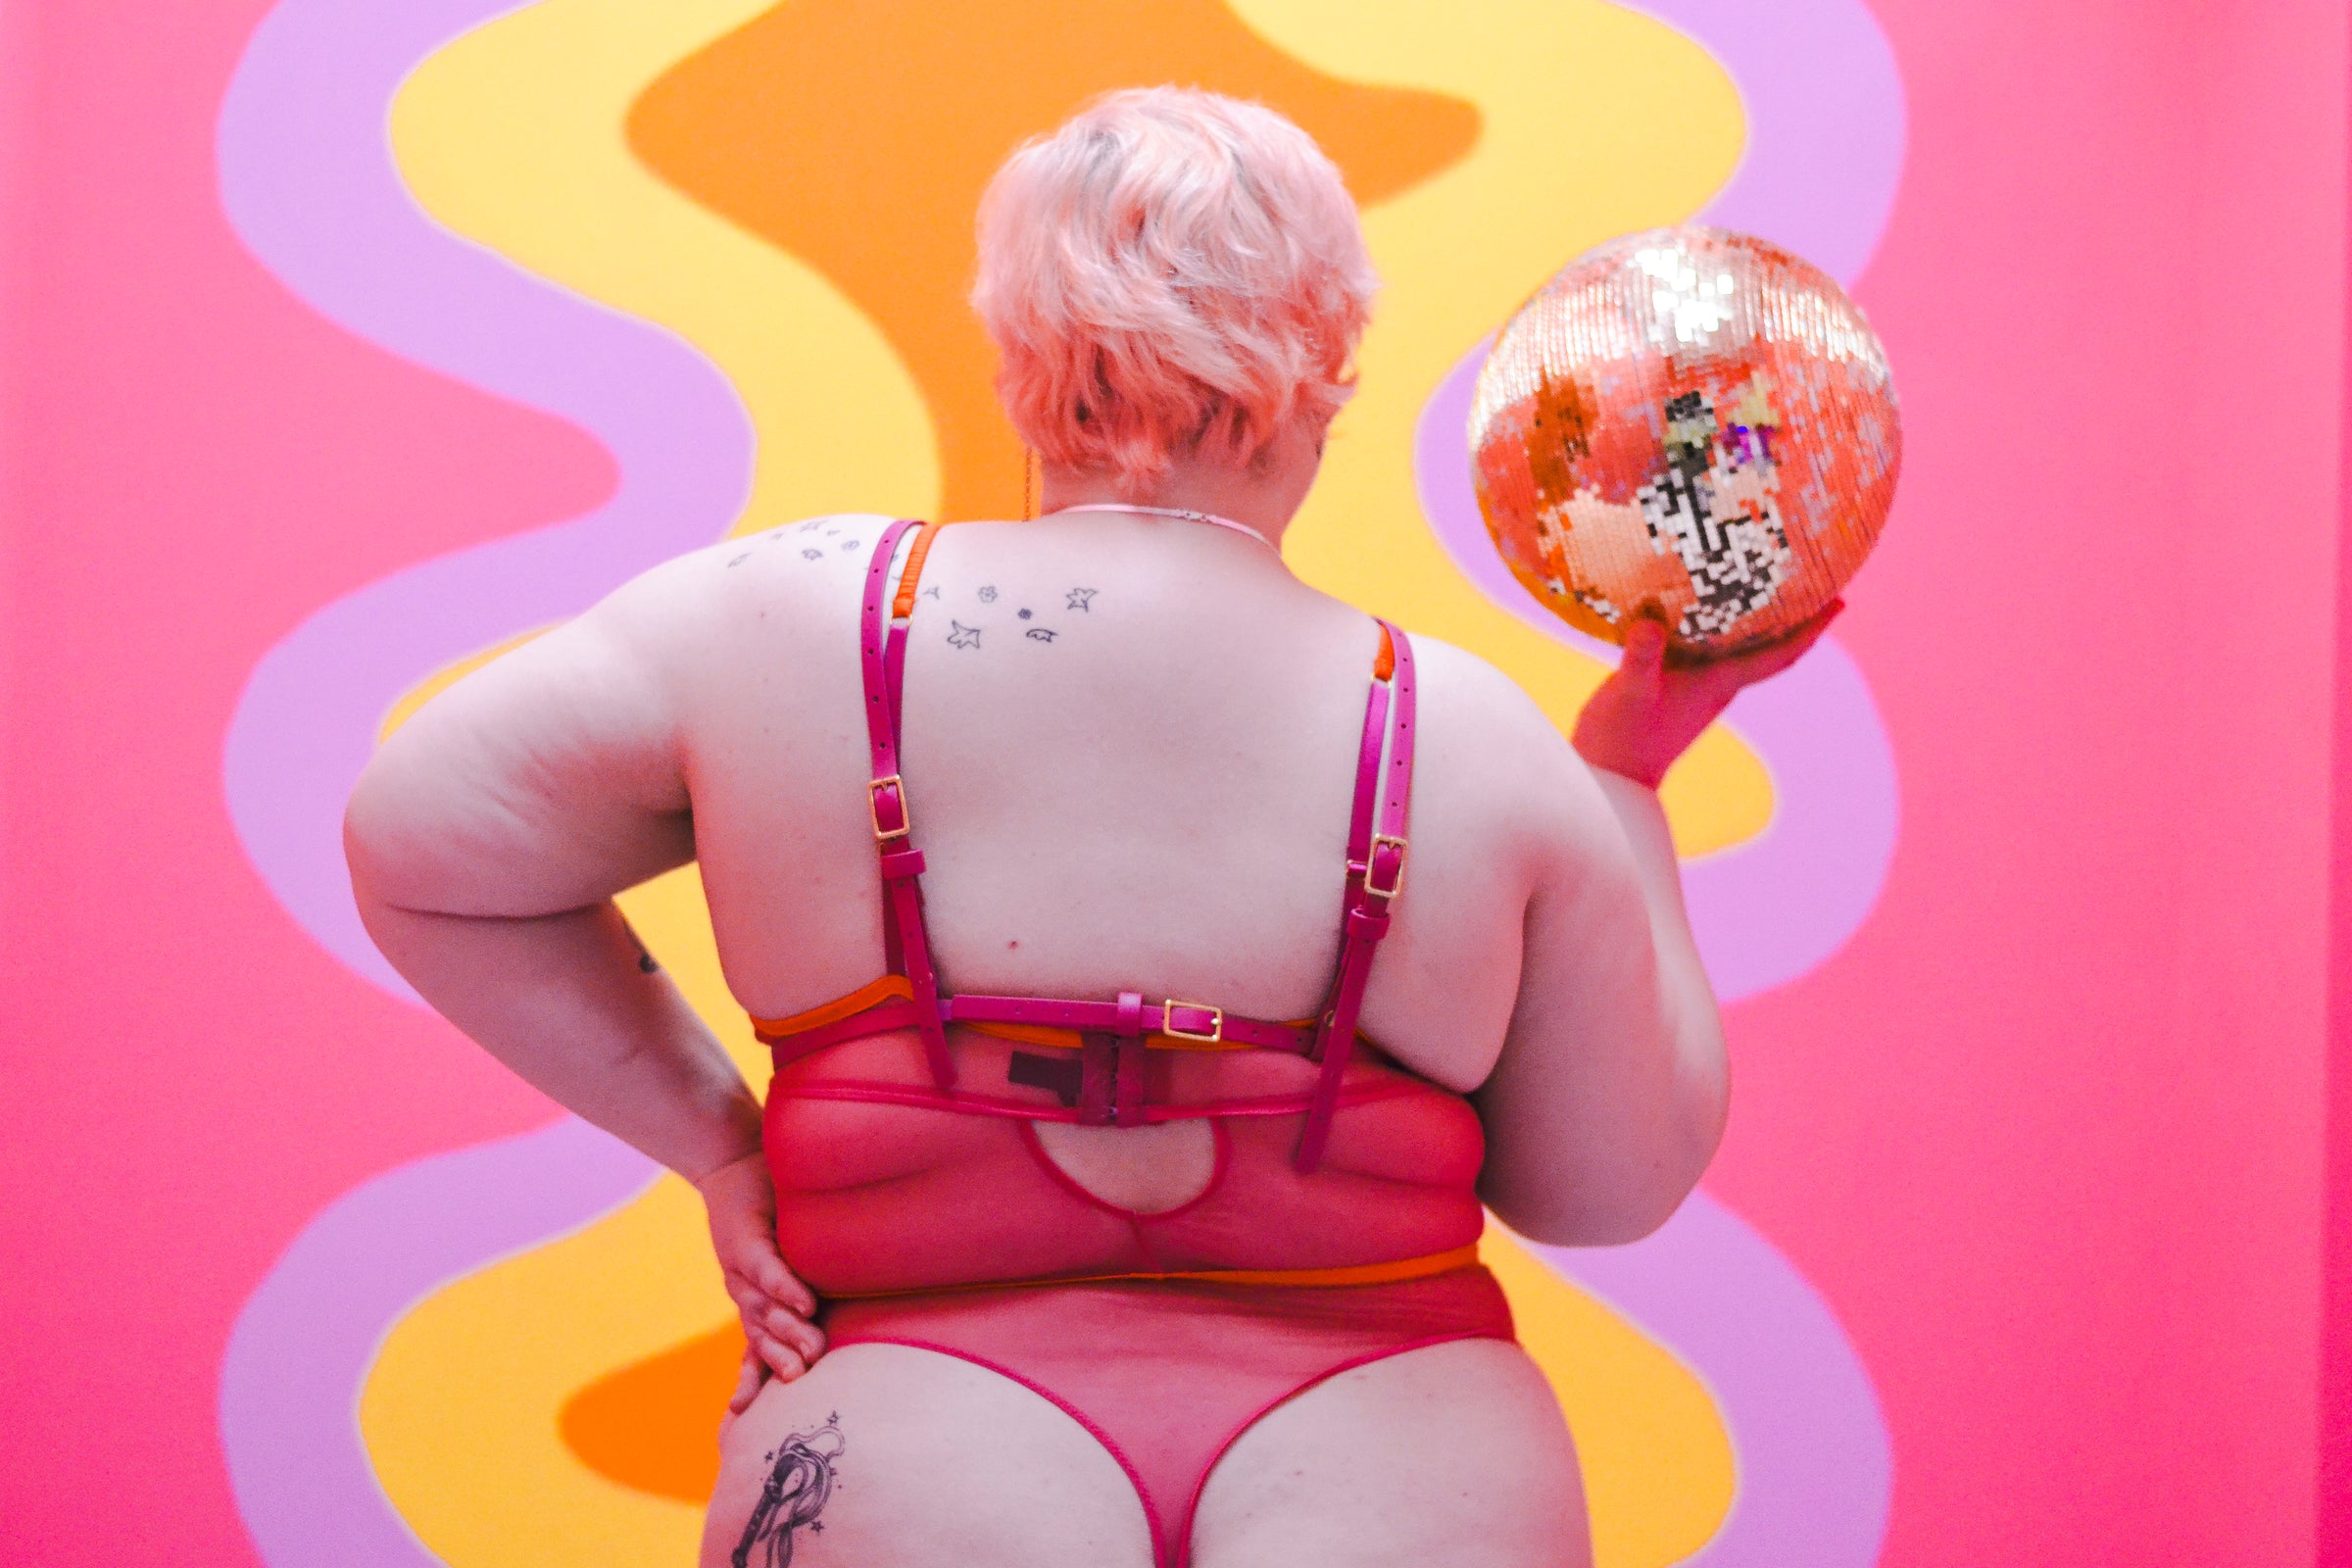 View of person from the back wearing a pink bodysuit and a red harness over it.